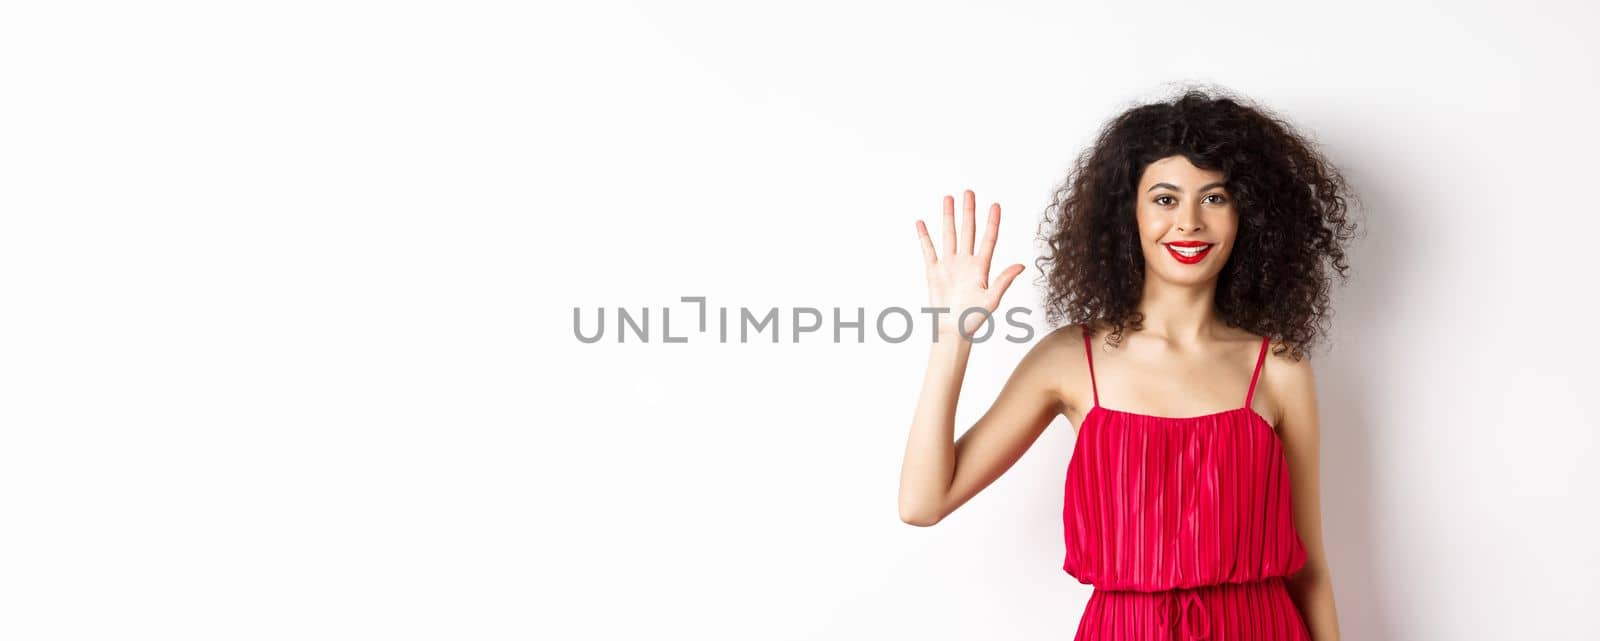 Cheerful young woman with makeup and red dress, showing five fingers and smiling, standing over white background. Copy space